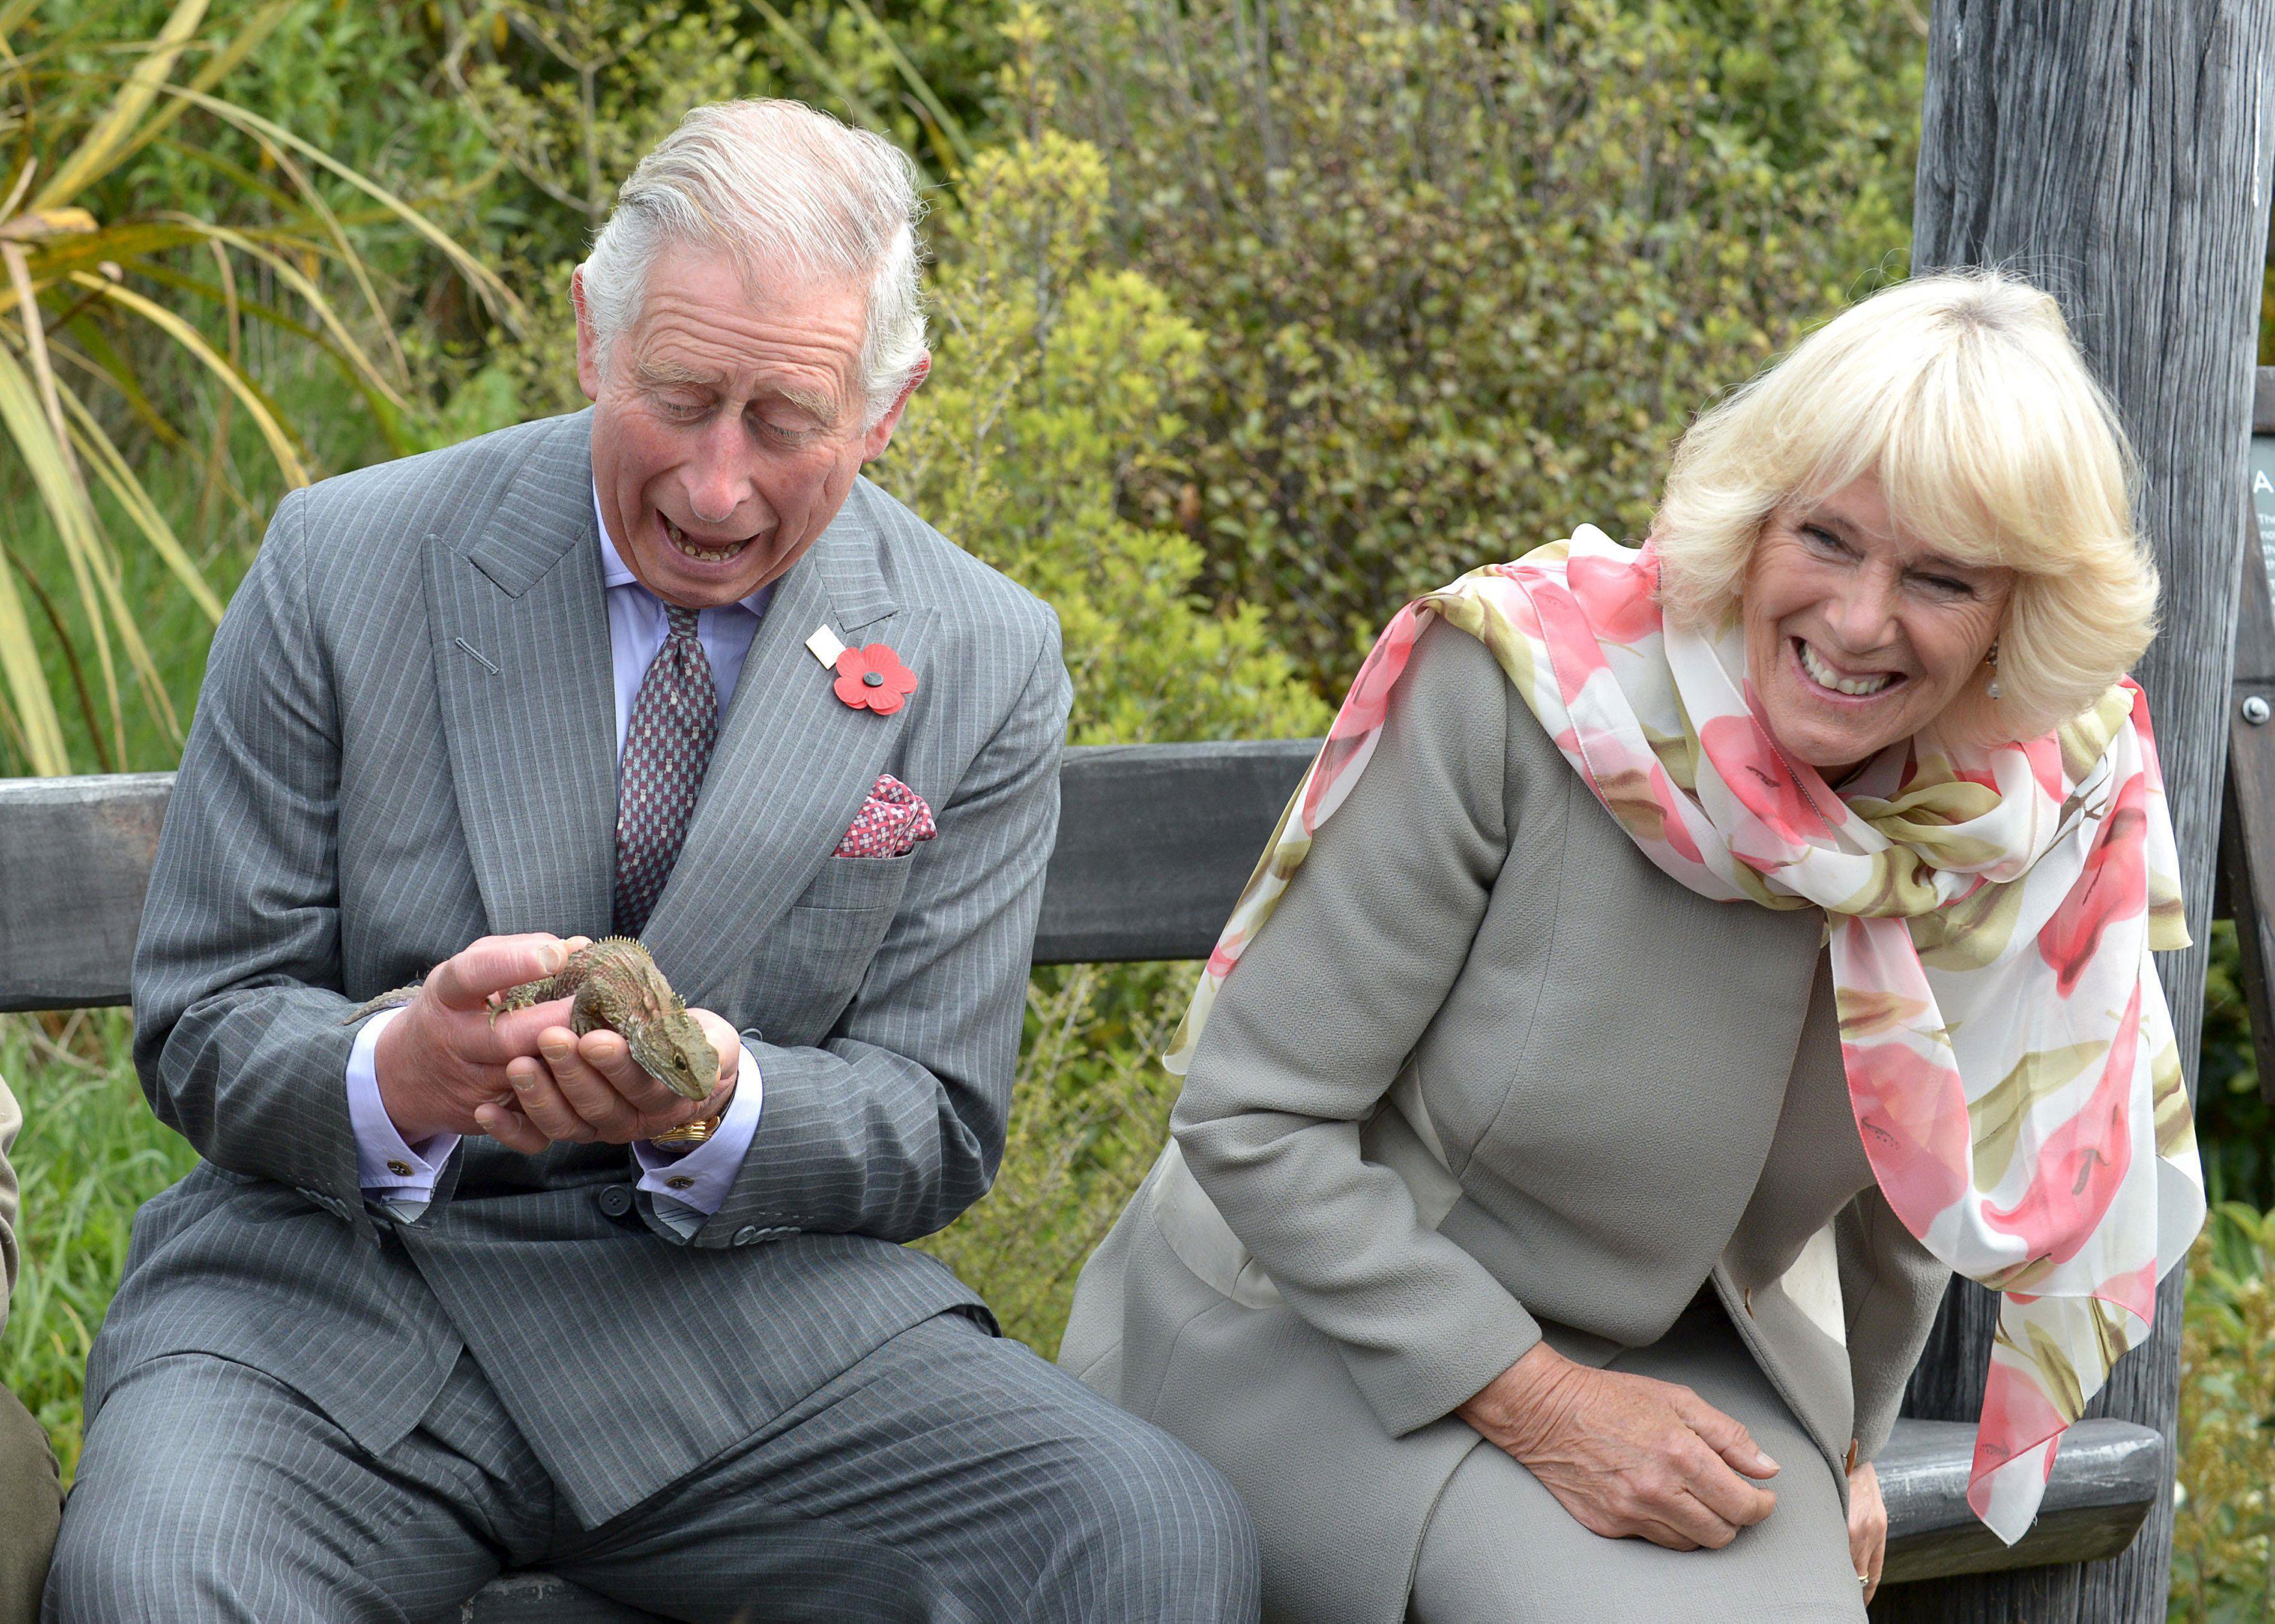 Britain's Prince Charles reacts after a large bumblebee briefly landed on the Prince's pants and fle